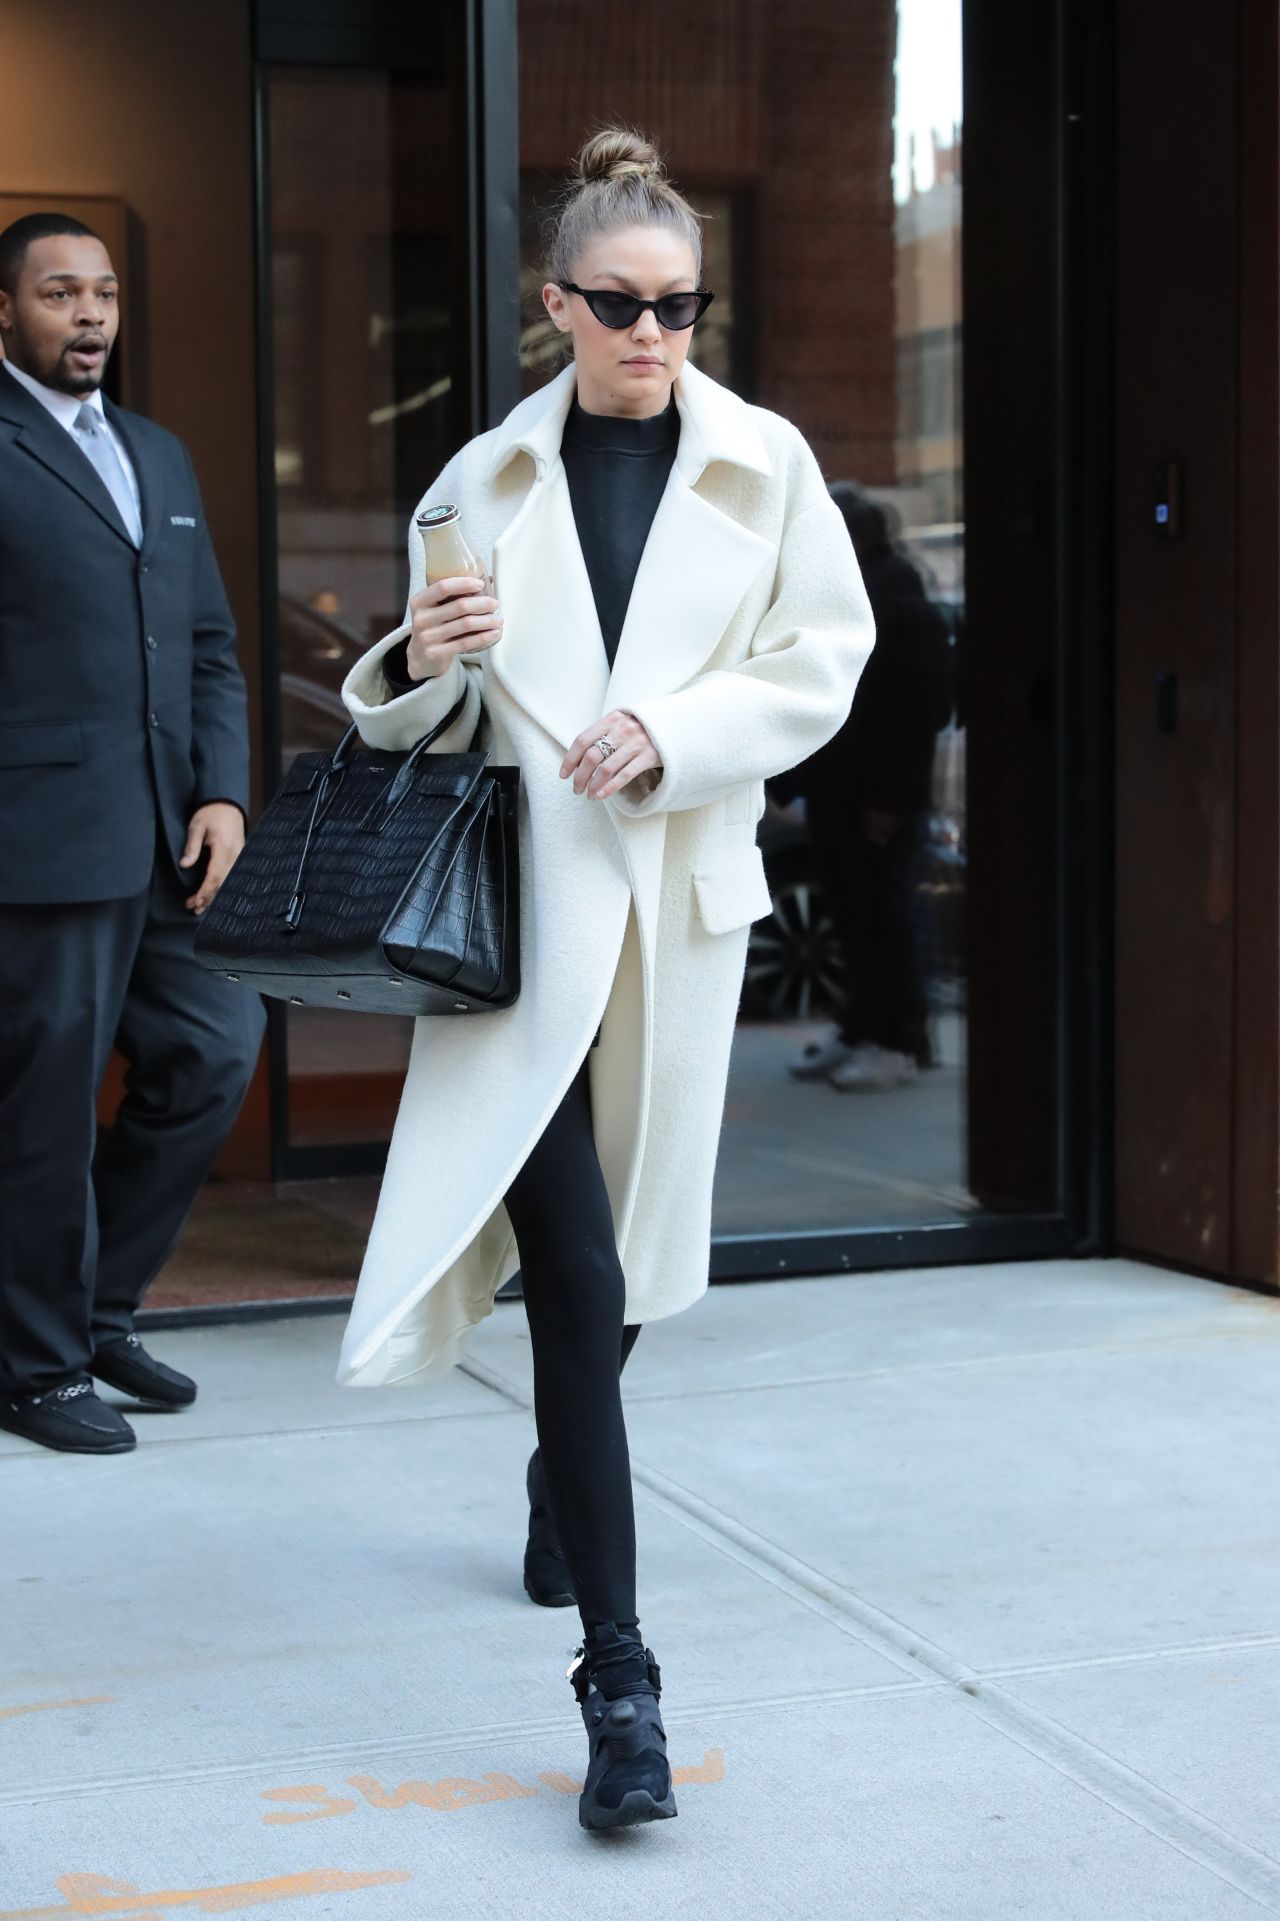 Gigi Hadid is Stylish in White and Black - Leaving Her Home in NYC ...